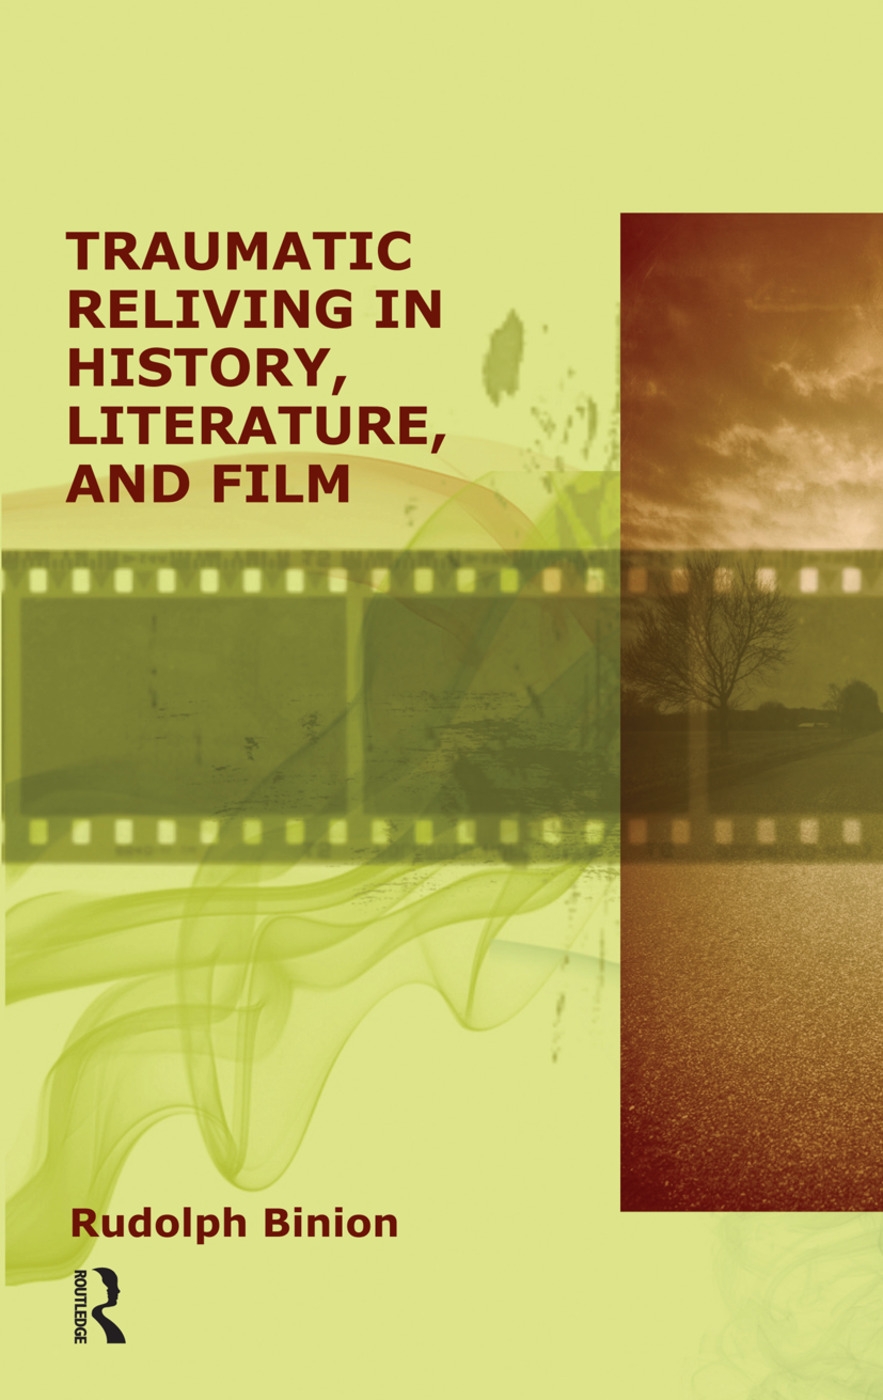 Traumatic Reliving in History, Literature, and Film